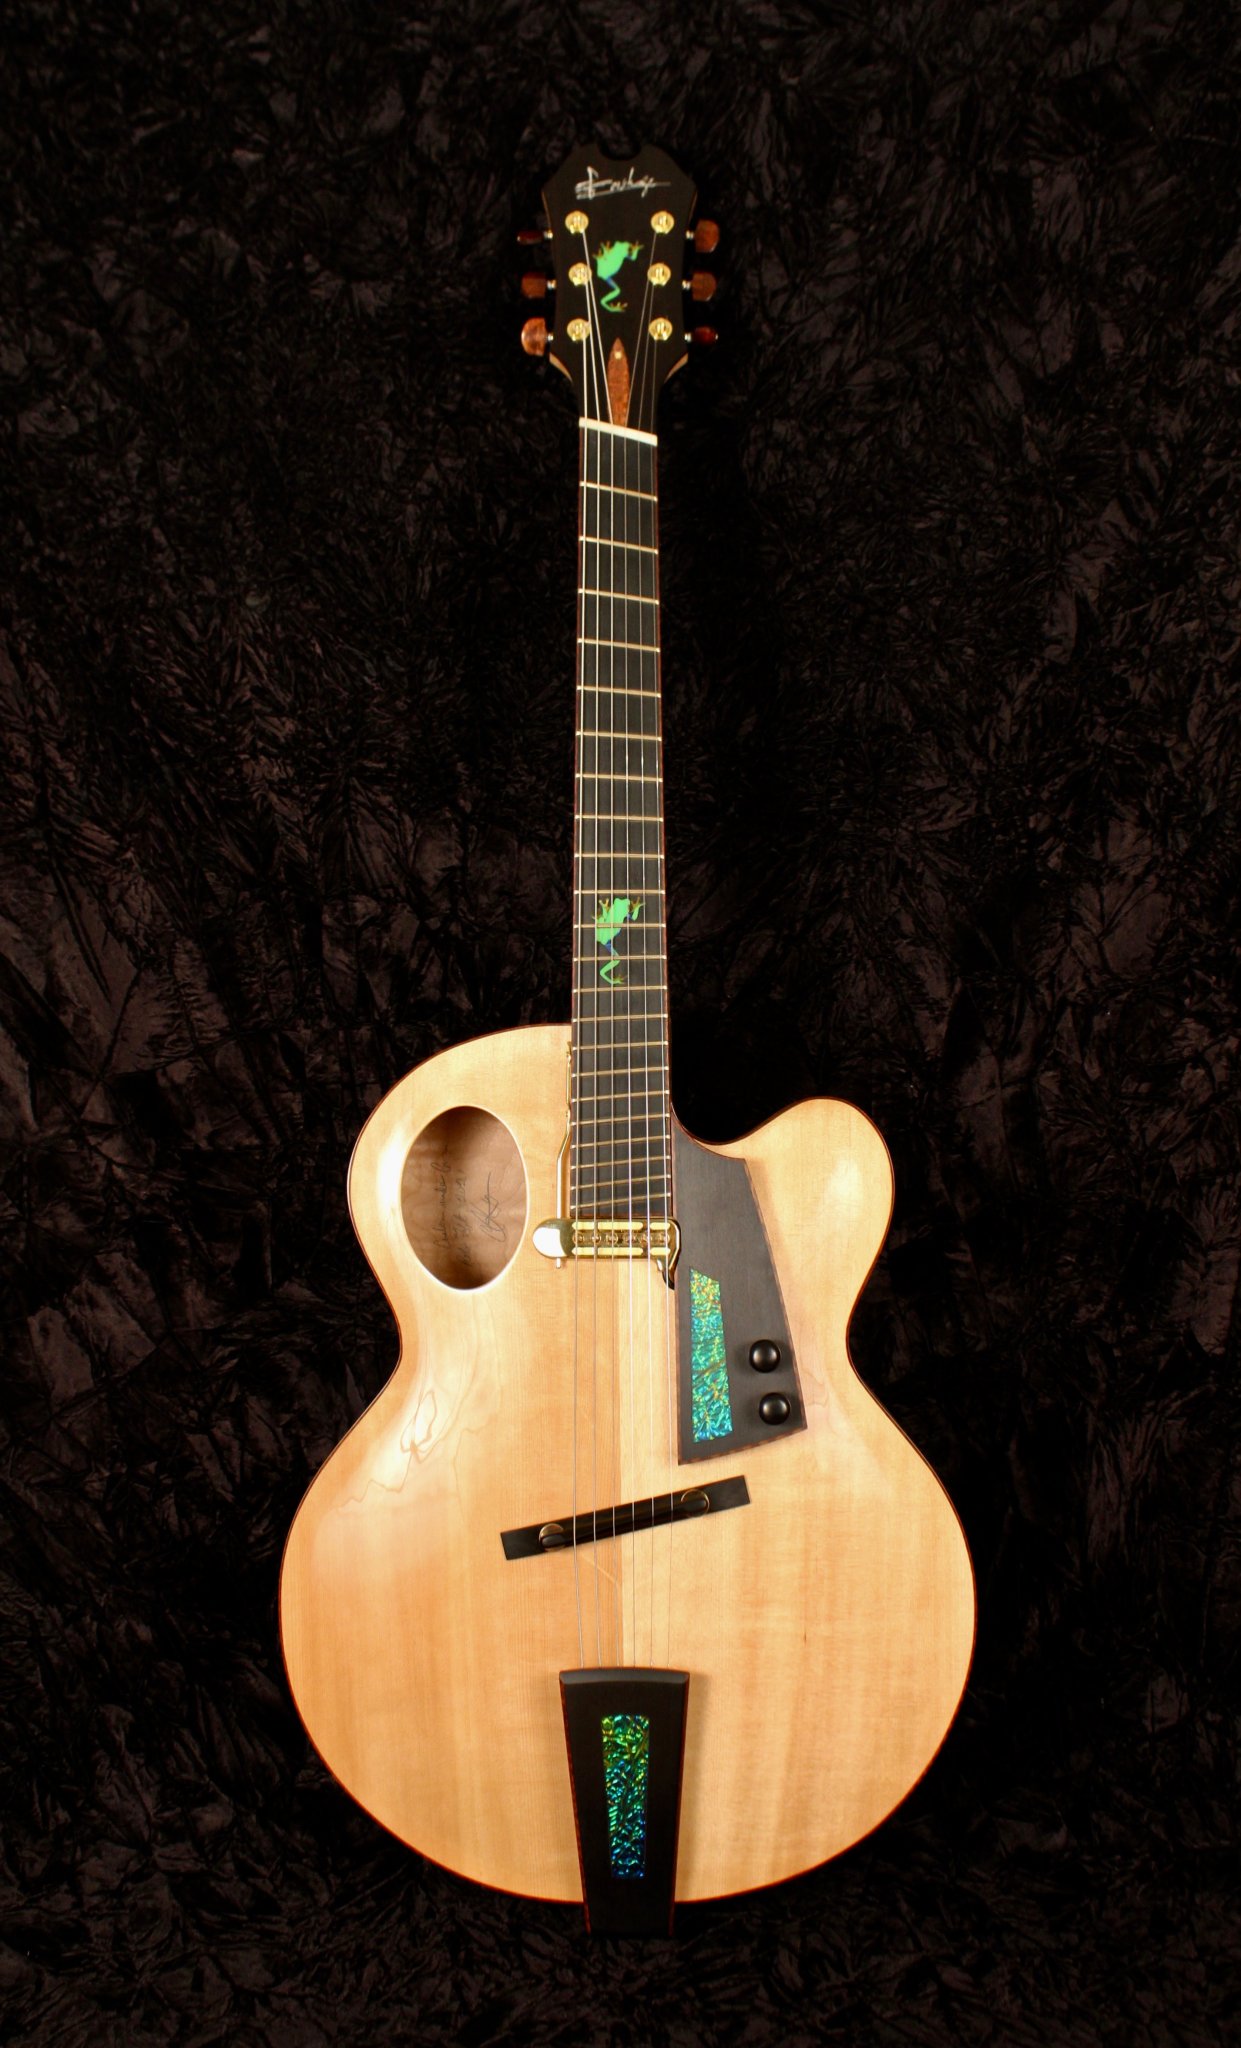 New guitar: 24-3/4 inch or 25-1/2 inch scale?-forshage-front-jpg